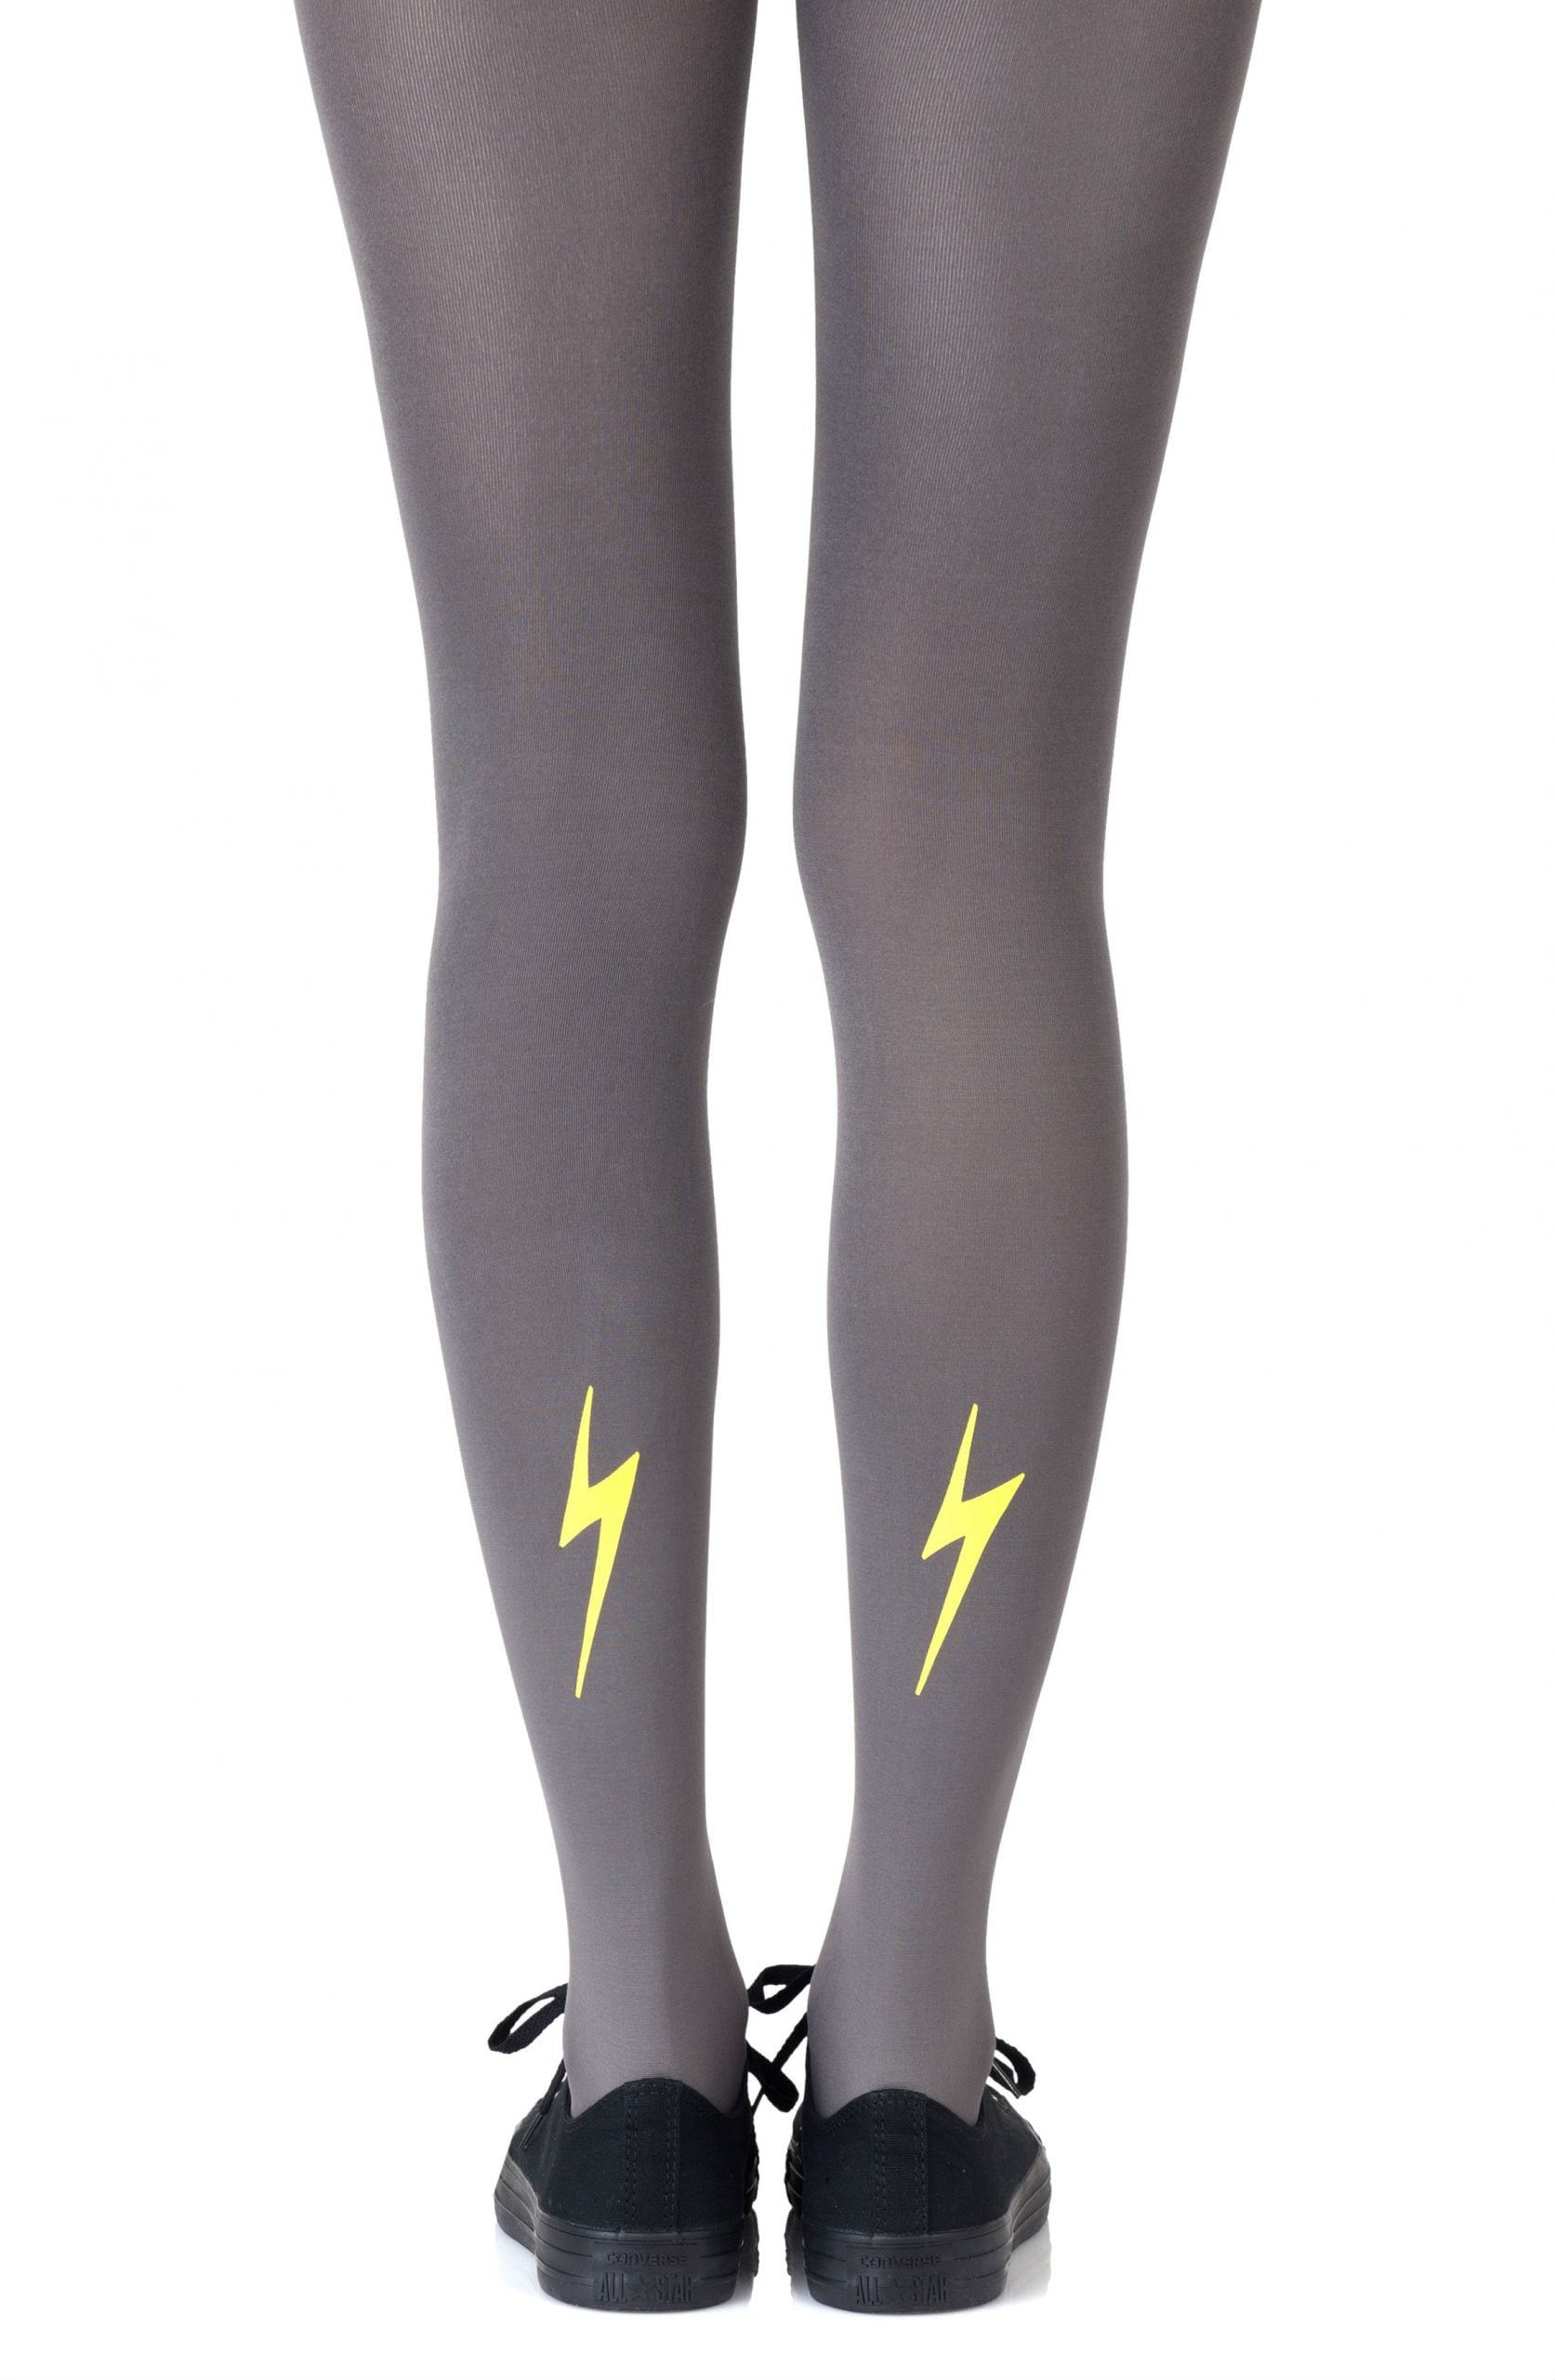 Vibrators, Sex Toy Kits and Sex Toys at Cloud9Adults - Zohara "Electric Feel" Yellow Print Tights - Buy Sex Toys Online